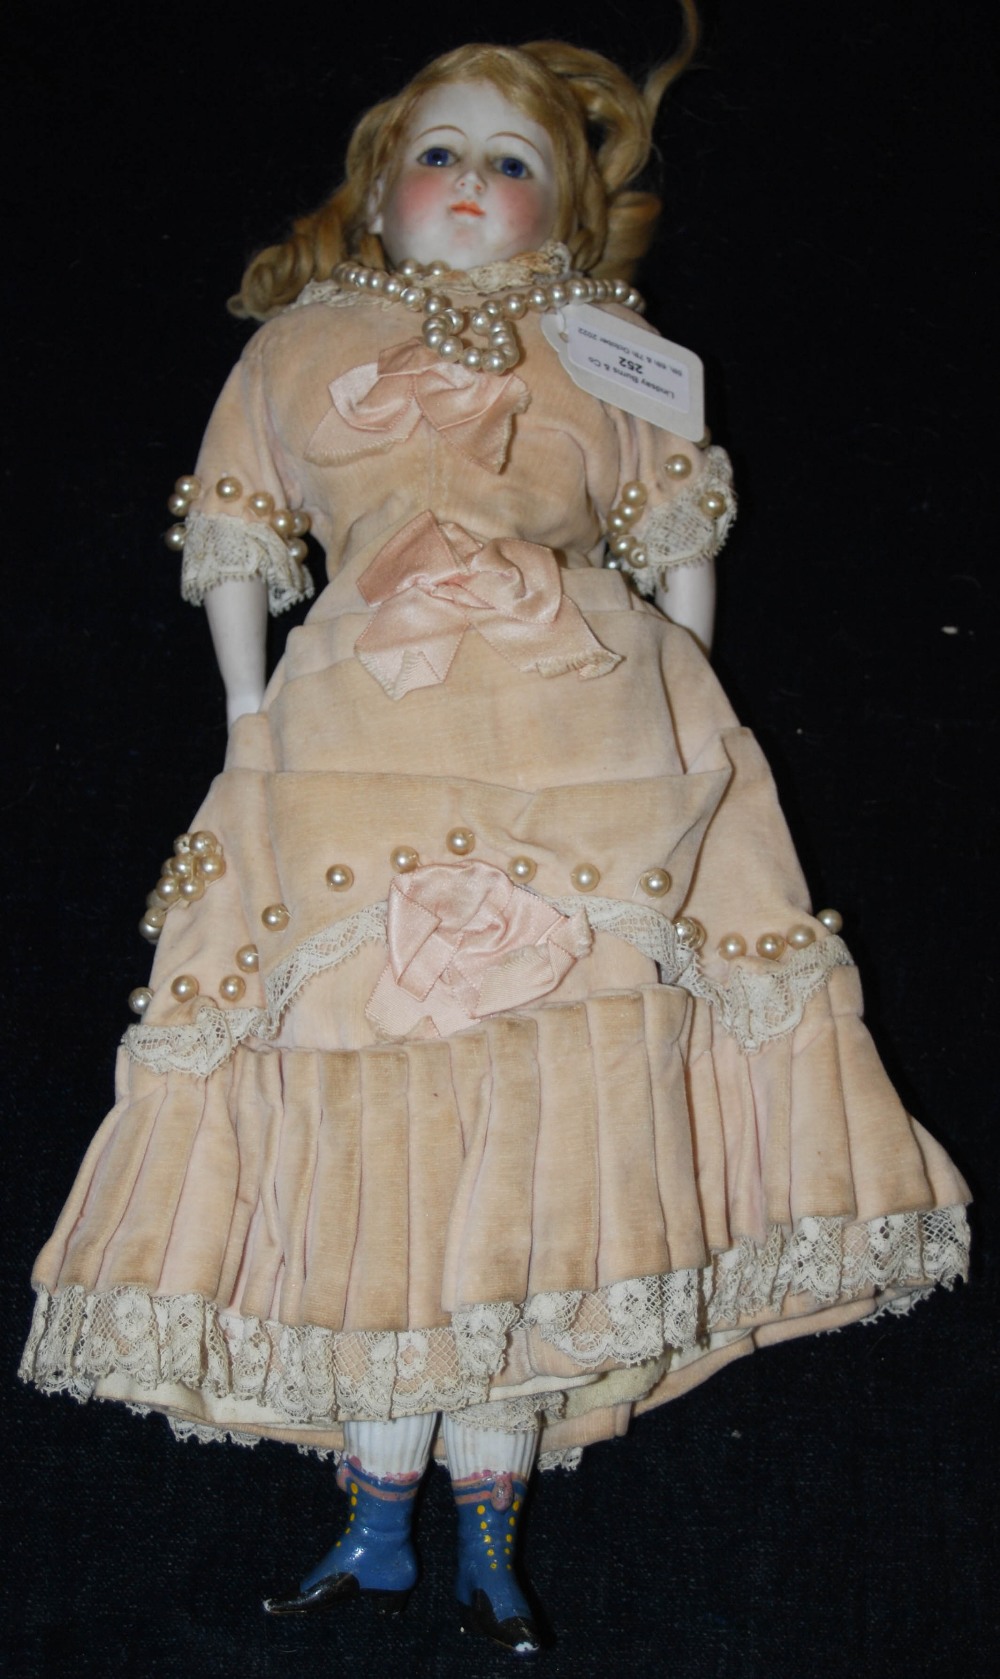 A LATE 19TH / EARLY 20TH CENTURY BISQUE HEAD PORCELAIN DOLL, WITH PORCELAIN FORE ARMS AND LOWER